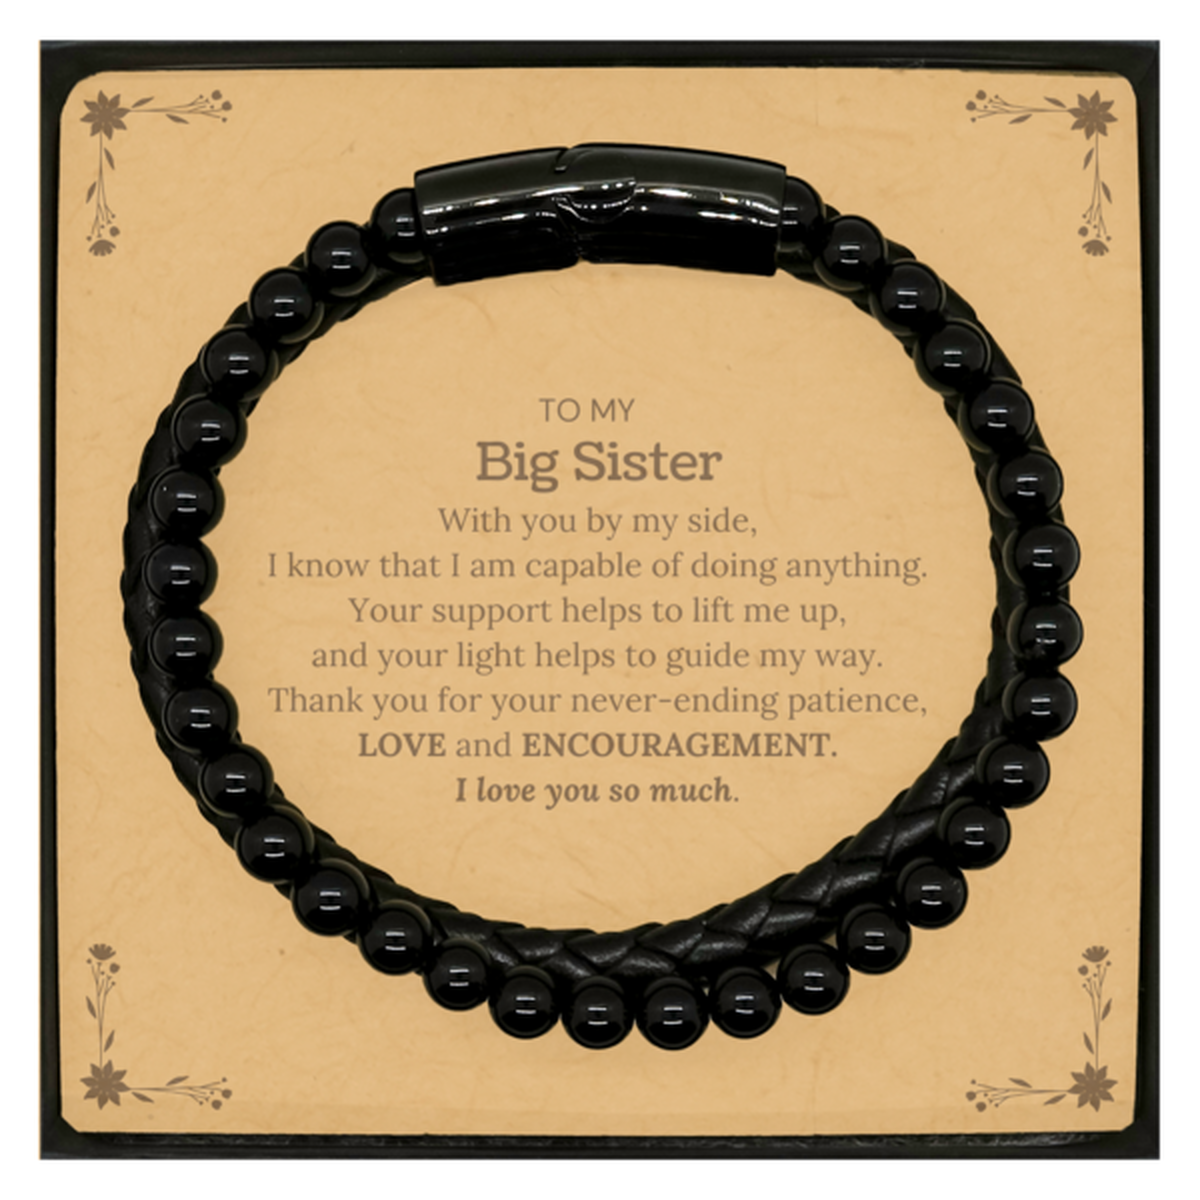 Appreciation Big Sister Stone Leather Bracelets Gifts, To My Big Sister Birthday Christmas Wedding Keepsake Gifts for Big Sister With you by my side, I know that I am capable of doing anything. I love you so much